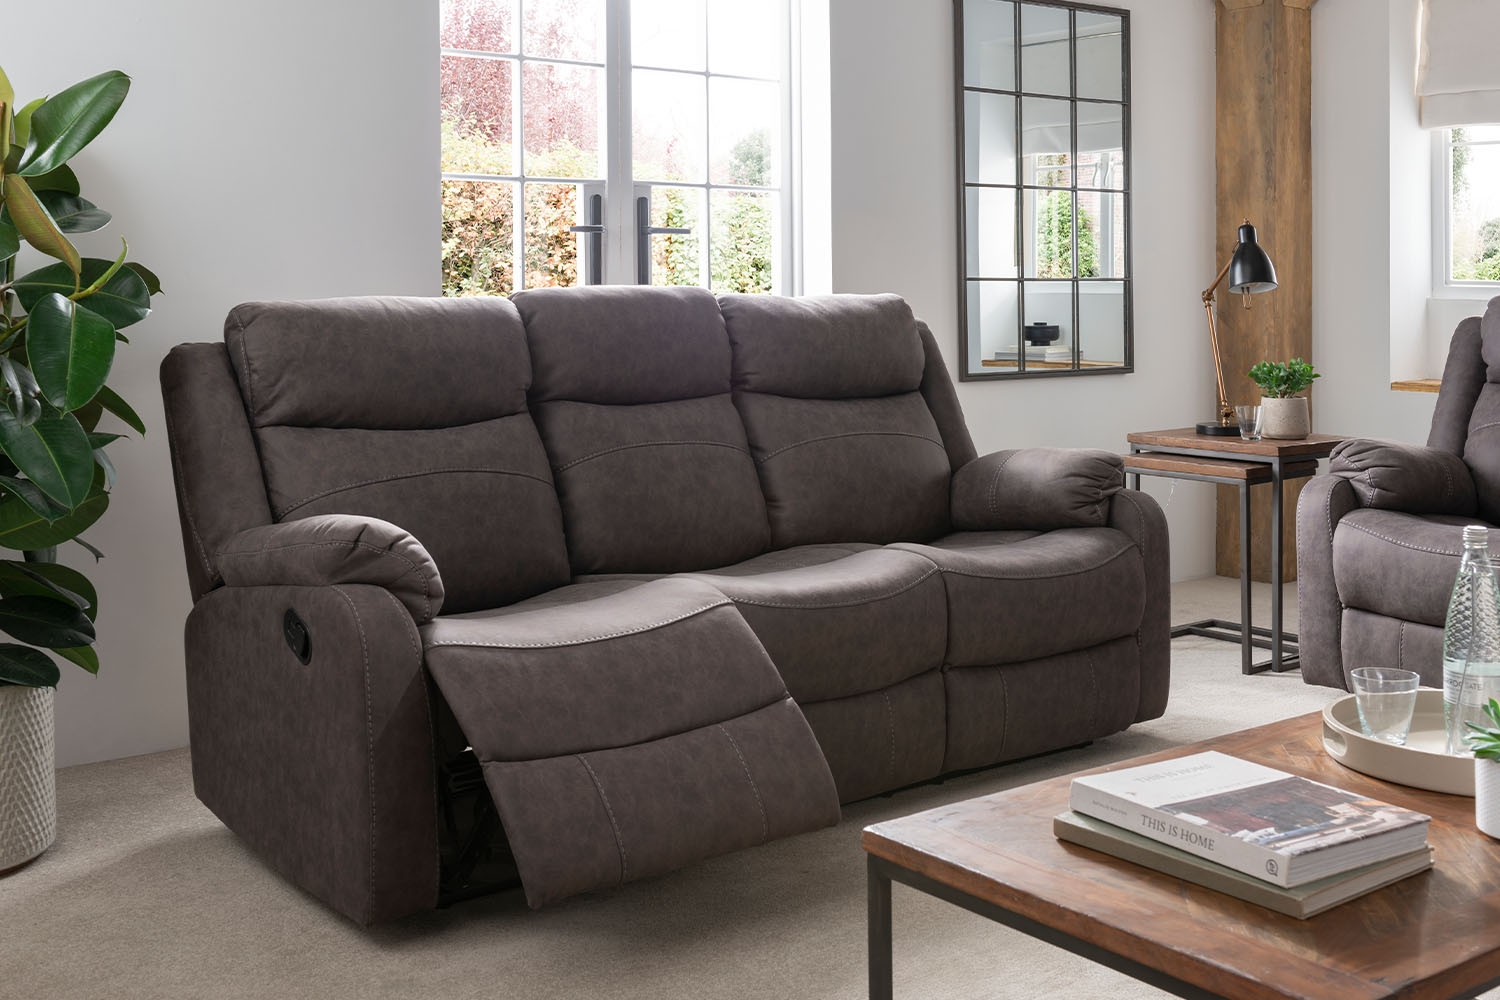 Ellena Grey 3 Seater Recliner Sofa with Table - Furniture World